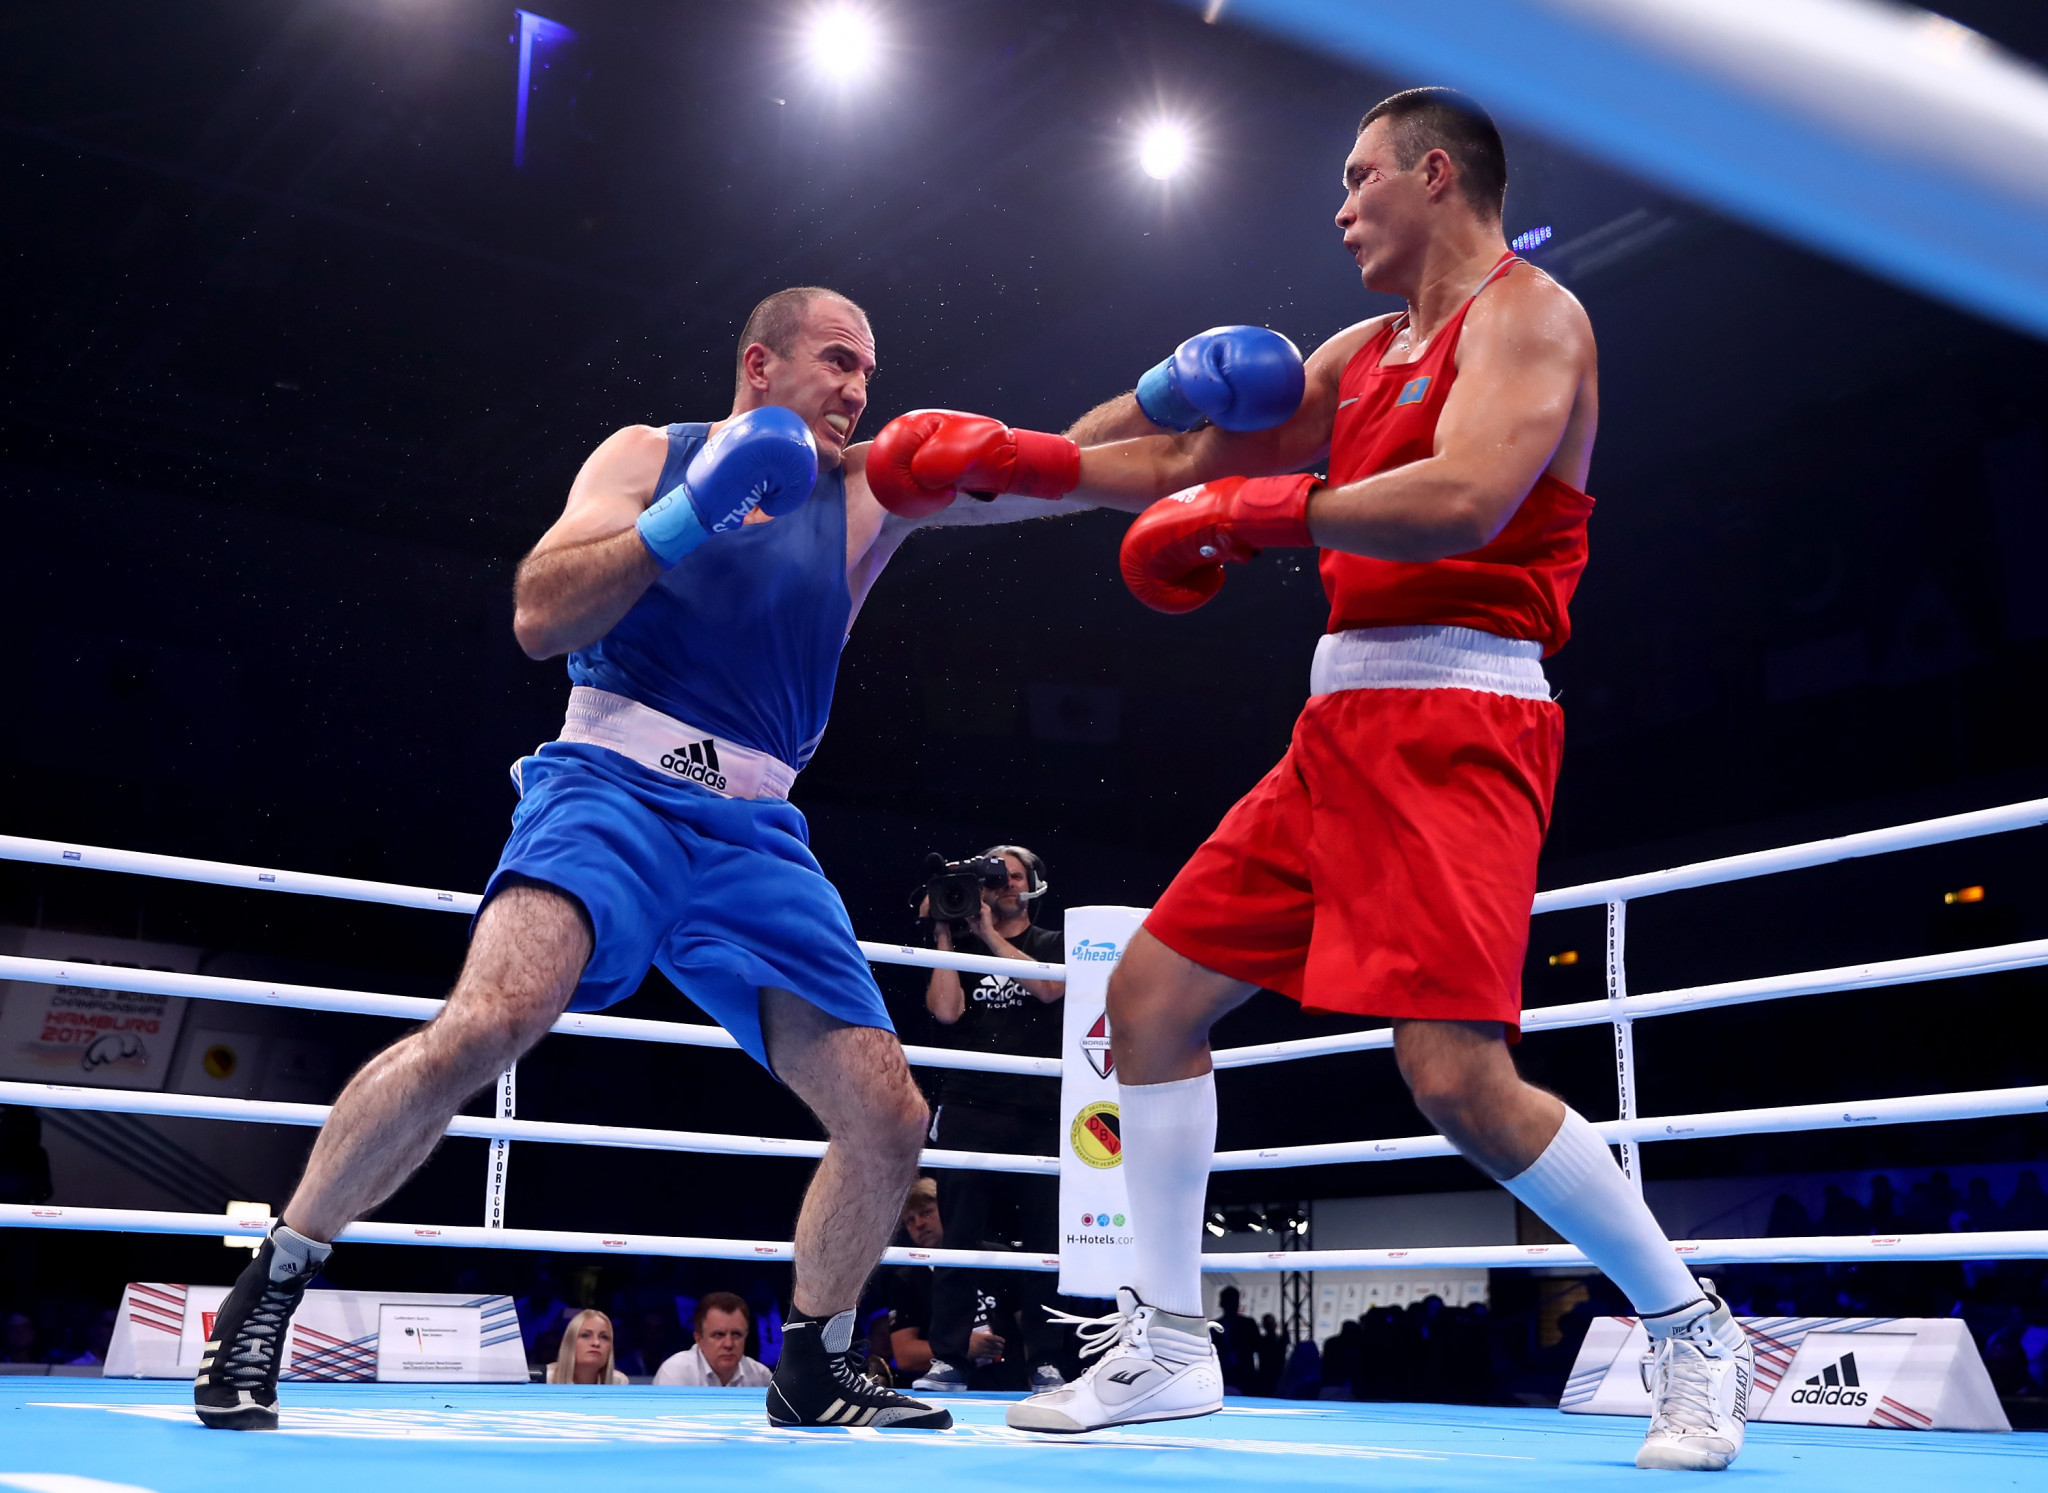 AIBA have insisted the World Championships in Sochi will be a clean event ©Getty Images